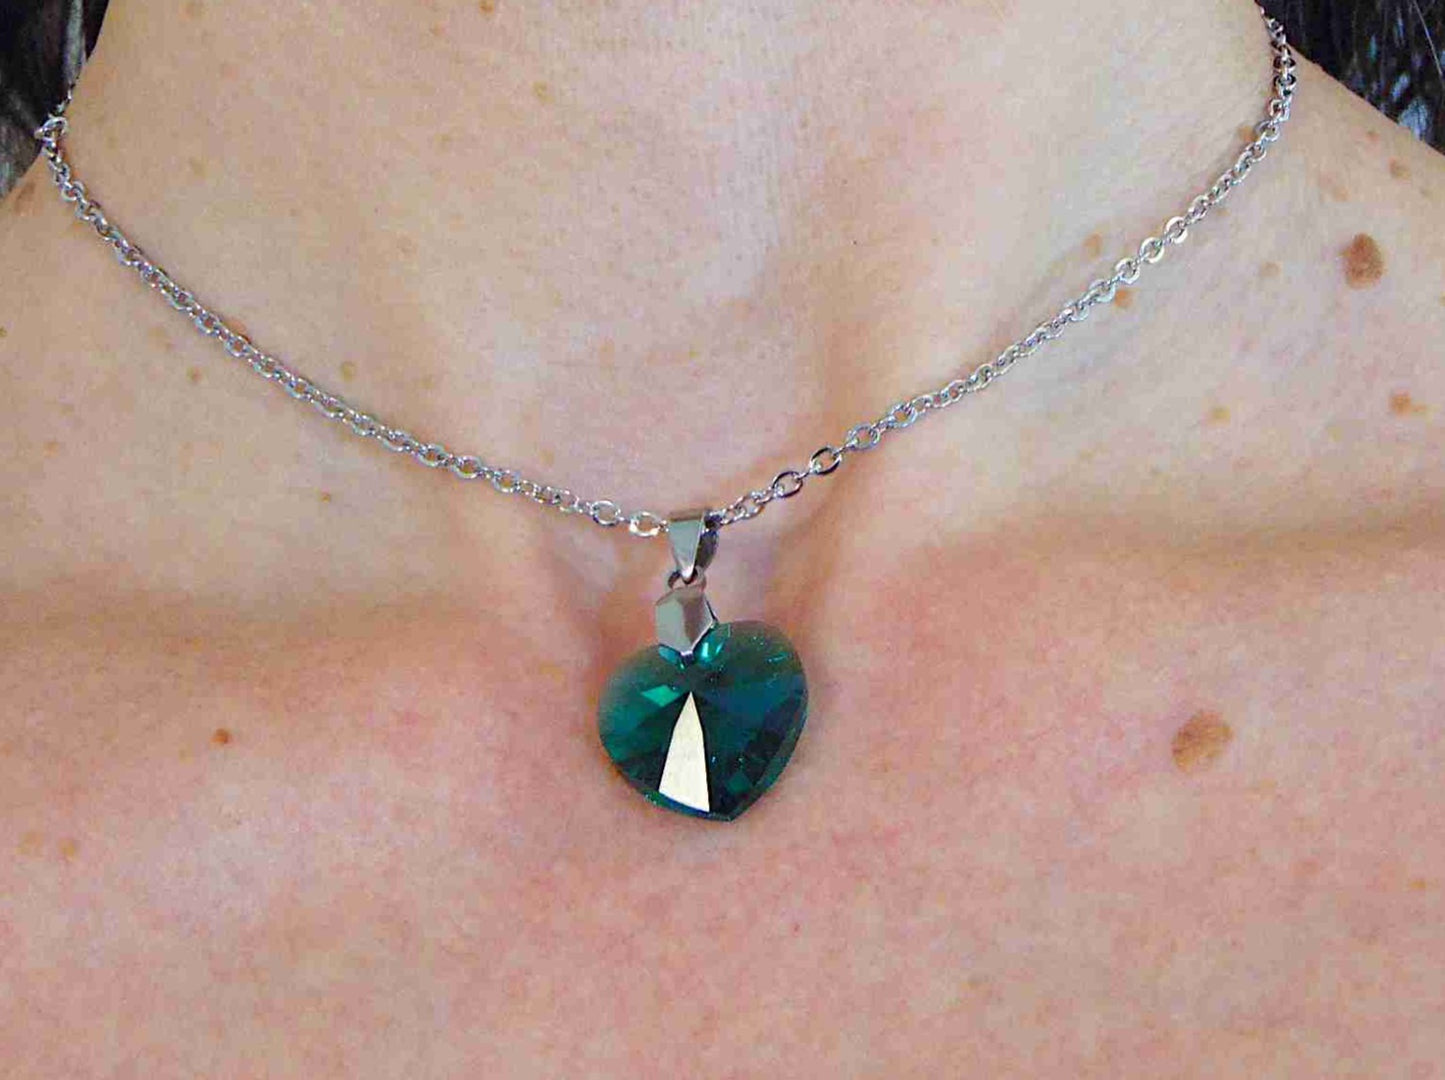 14/16-inch necklace with 18mm Emerald Green faceted Swarovski crystal heart pendant, stainless steel chain